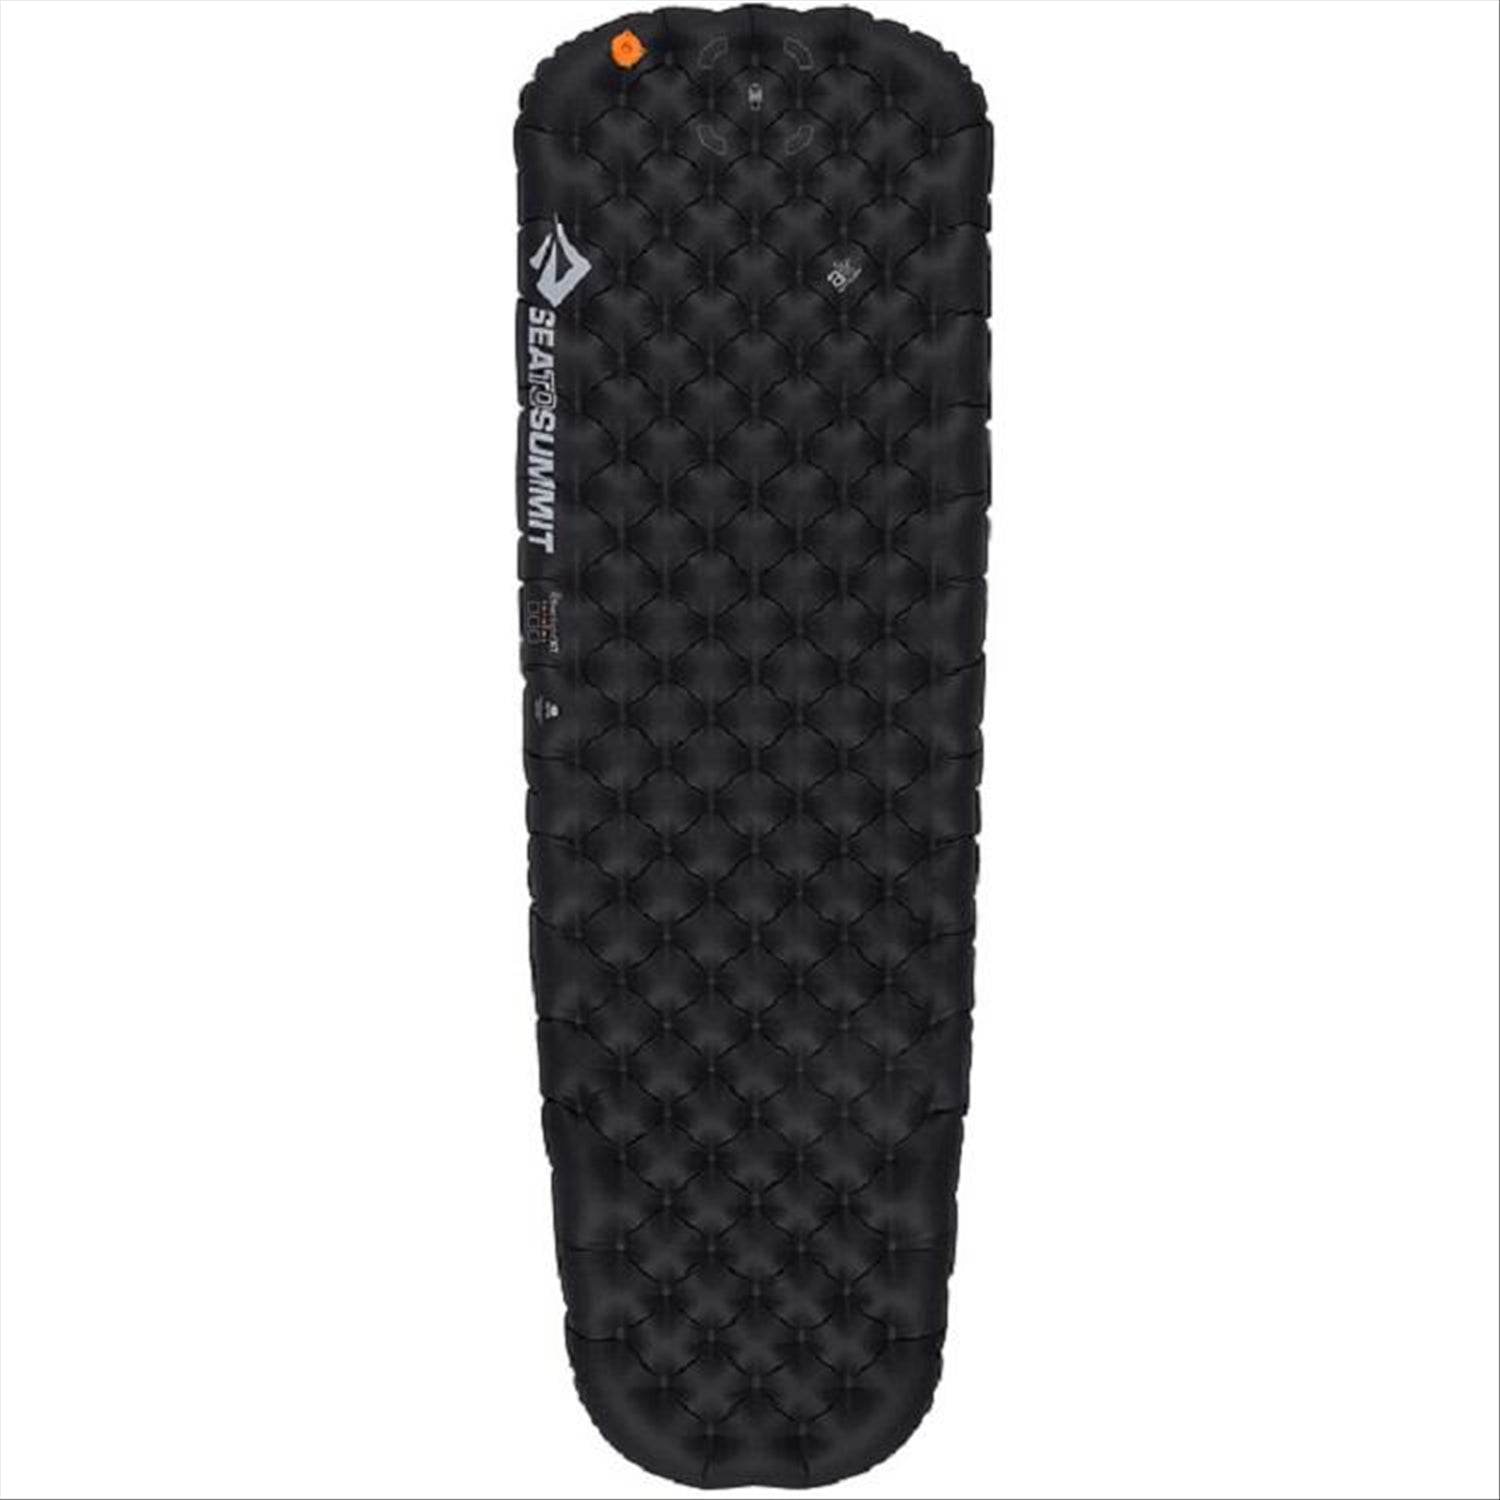 Sea to Summit Sea To Summit Ether Light XT Etreme Insulated Sleeping Mat, R-Value 6.2, 10cm thick